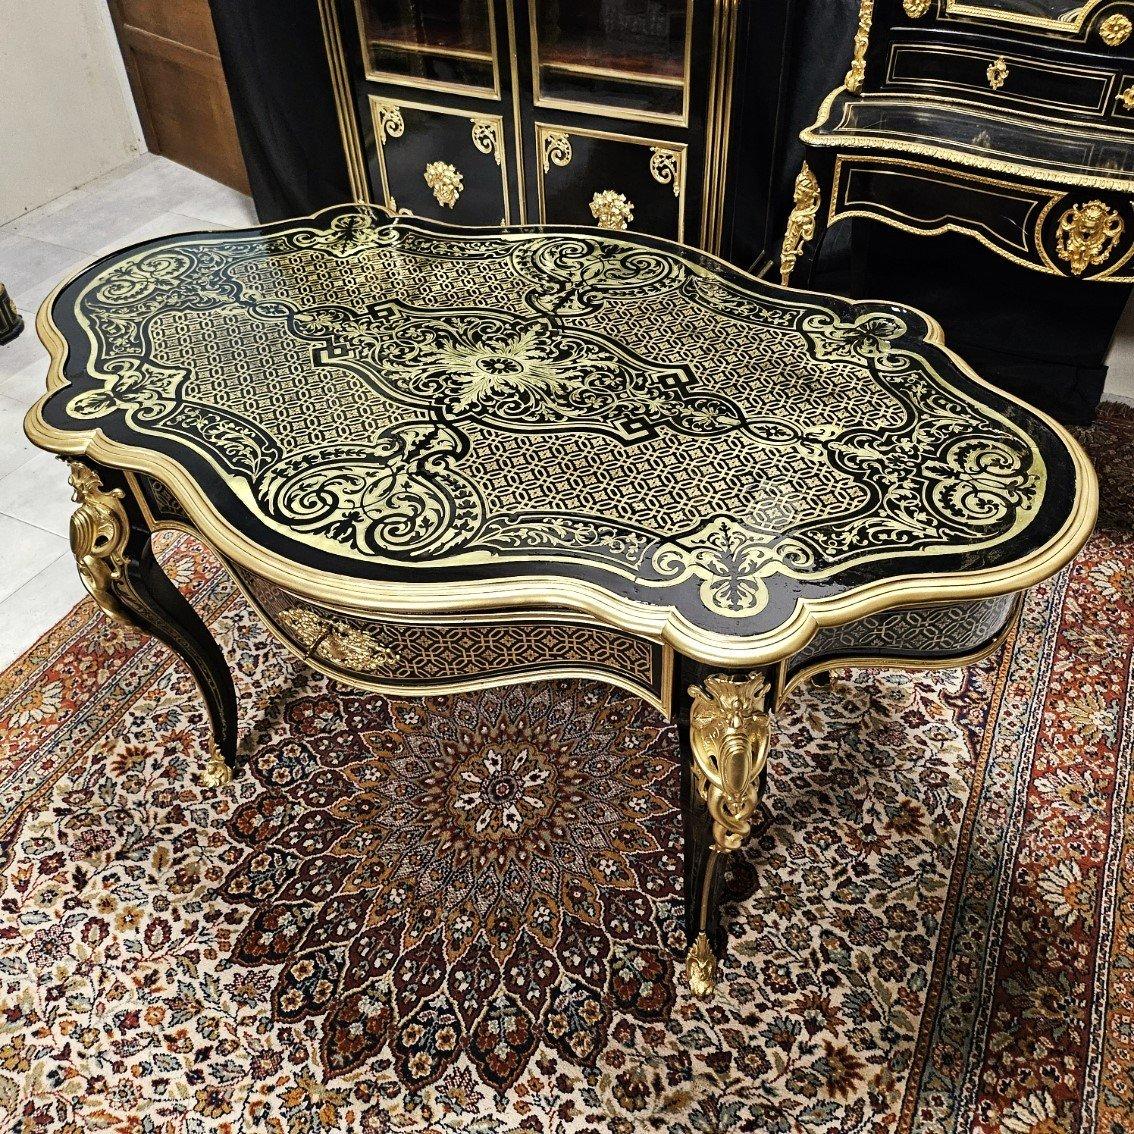 Diehl Black French Table Napoleon III Boulle Brass Gilt Bronze 19th Century For Sale 1